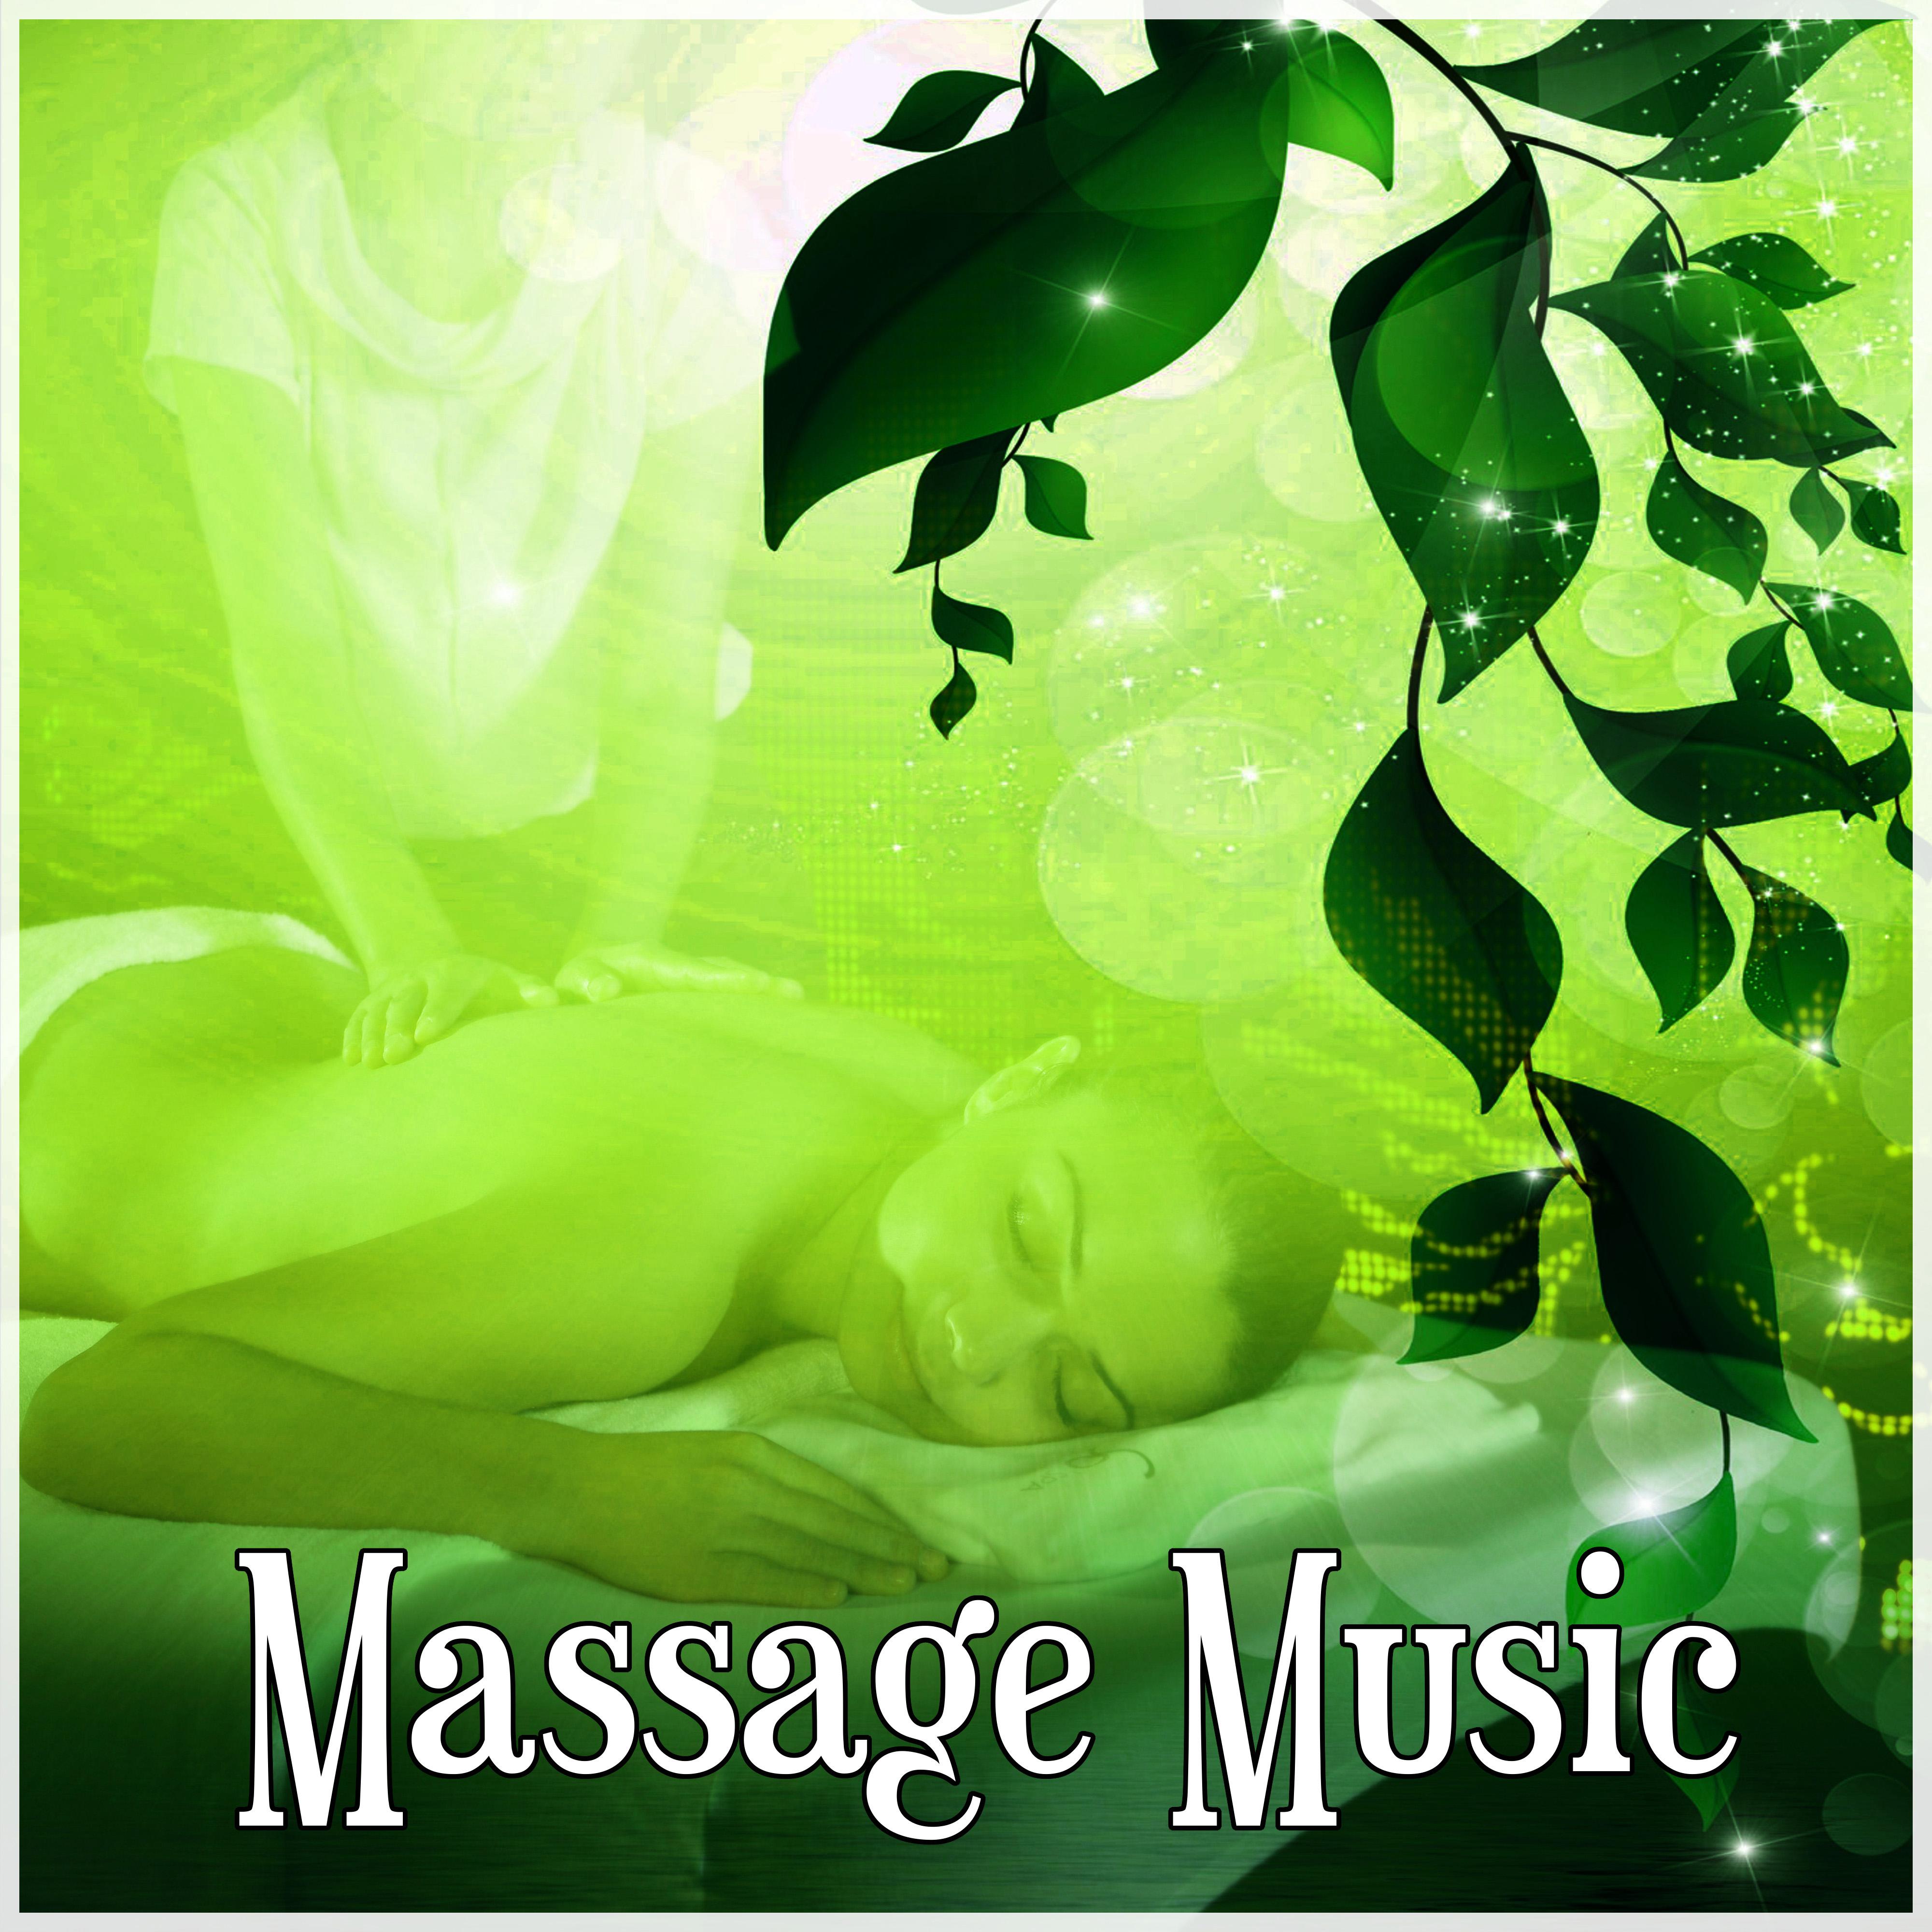 Massage Music – New Age Music for Classic Massage, Feel Pure Relax with Nature Sounds, Restful Massage Therapy